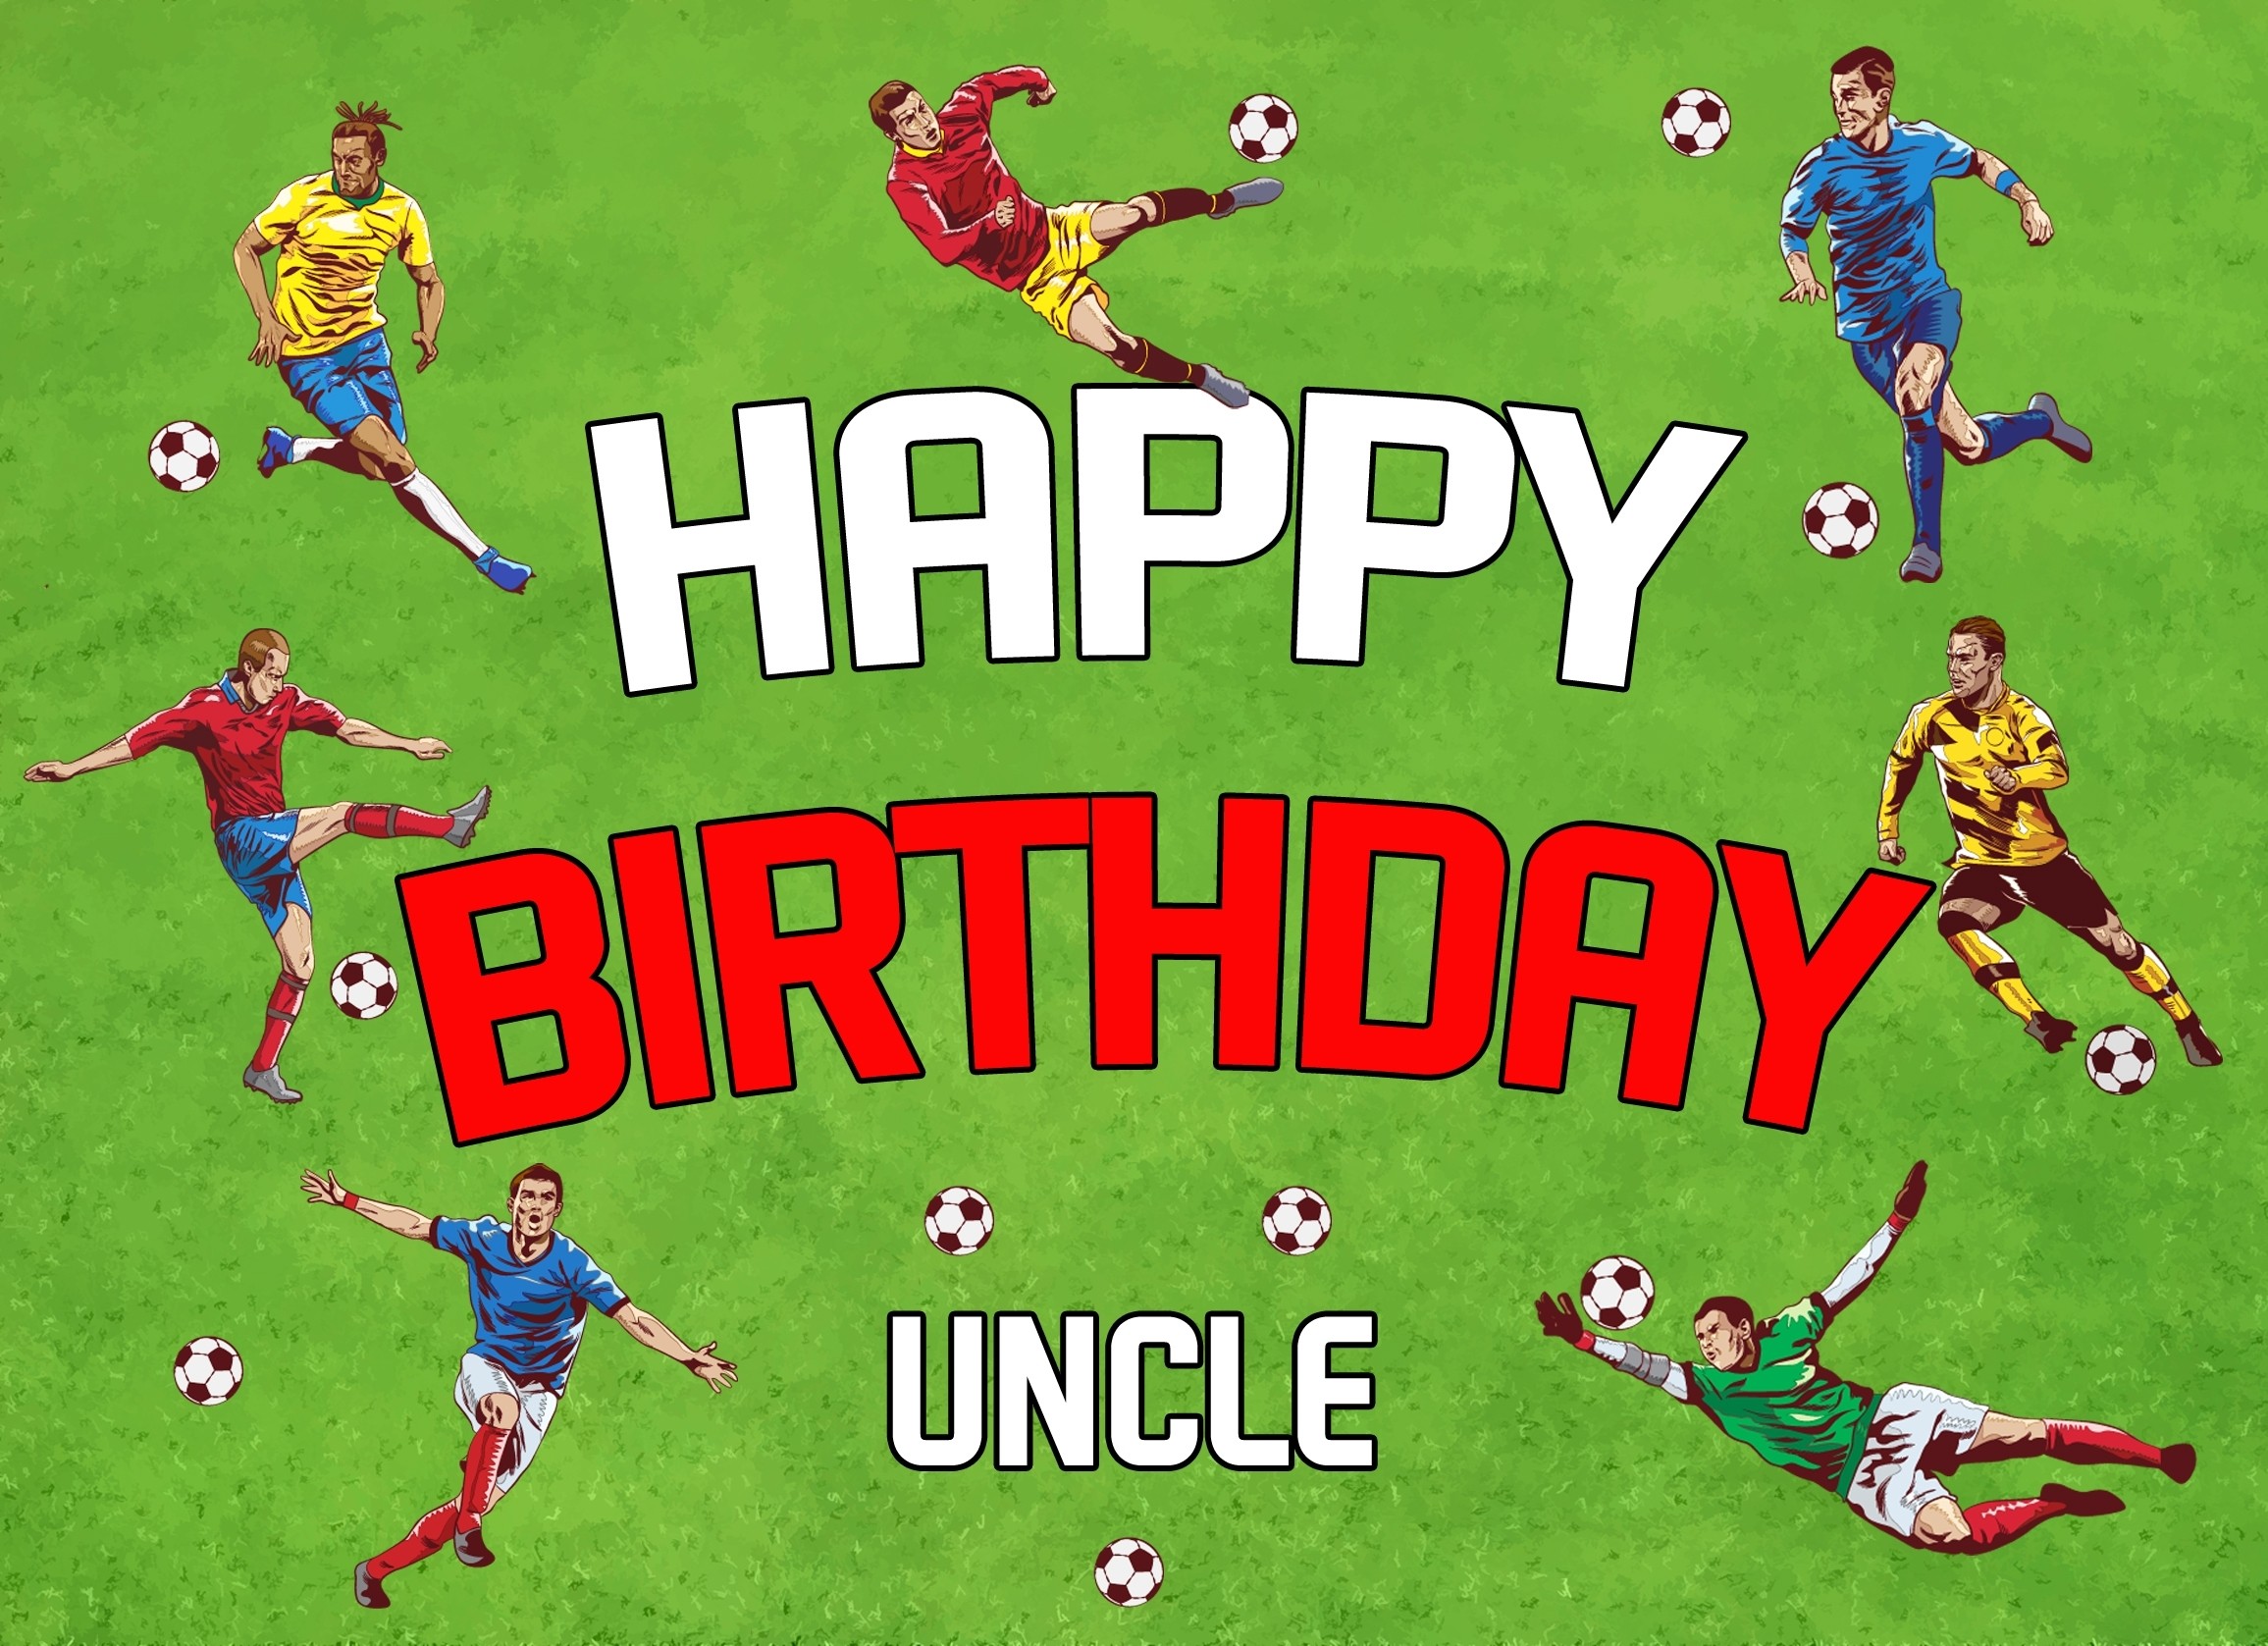 Football Birthday Card For Uncle (Landscape)